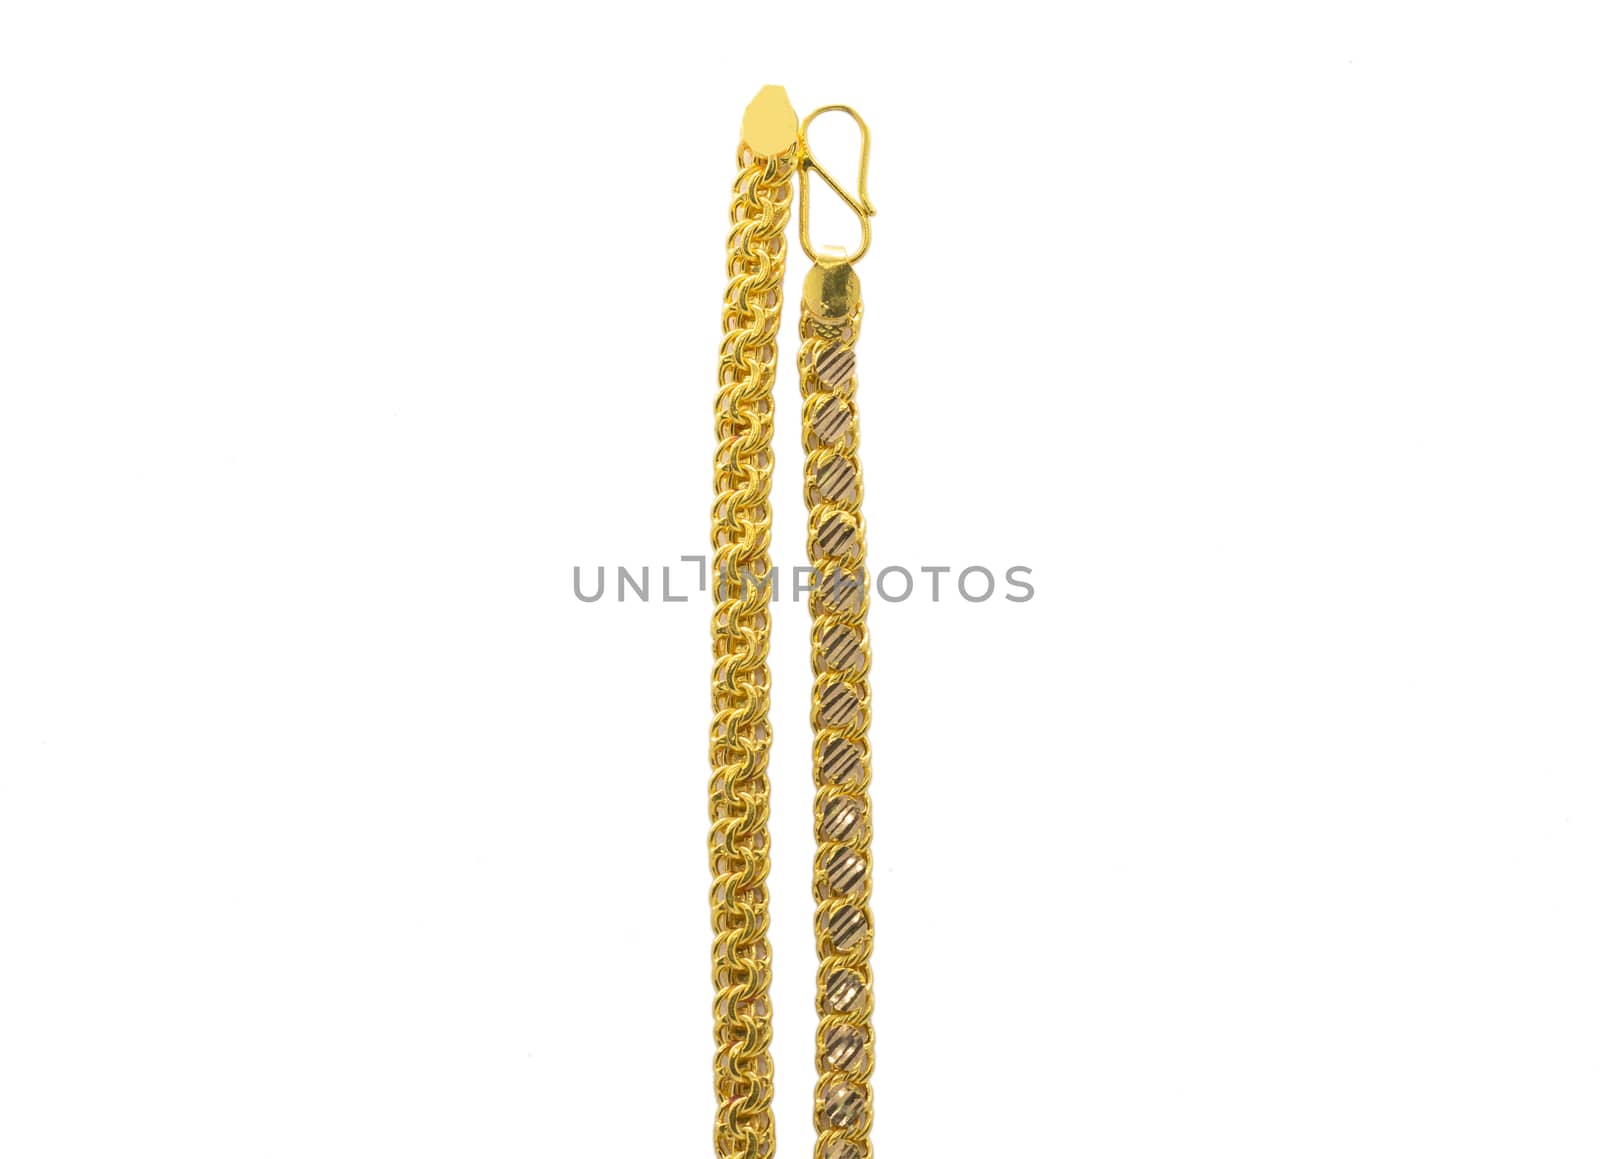 gold chain design on white background by 9500102400